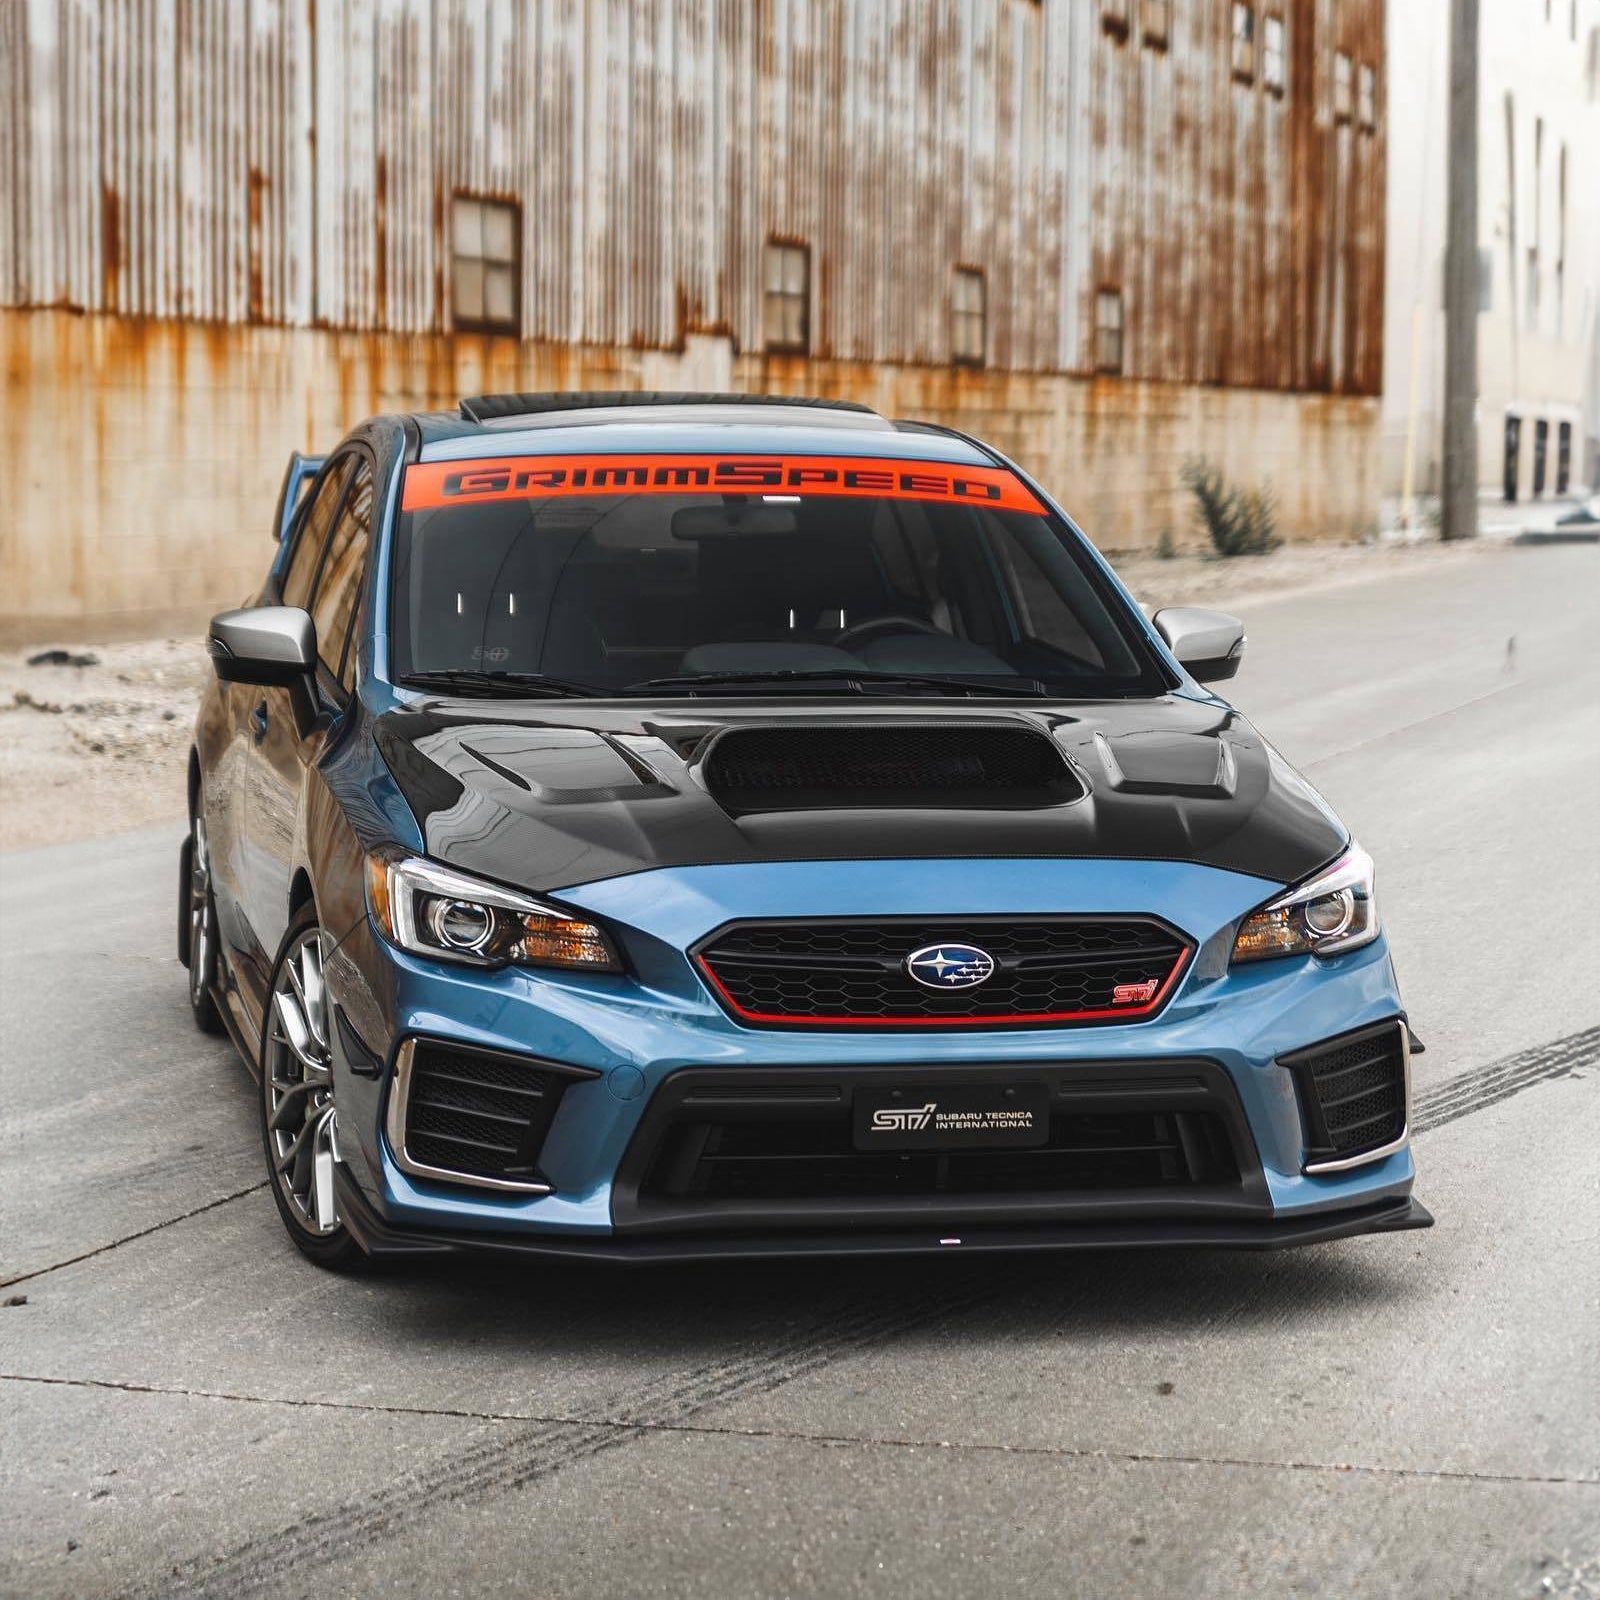 GrimmSpeed Windshield Banners - FREE U.S. SHIPPING! - 0